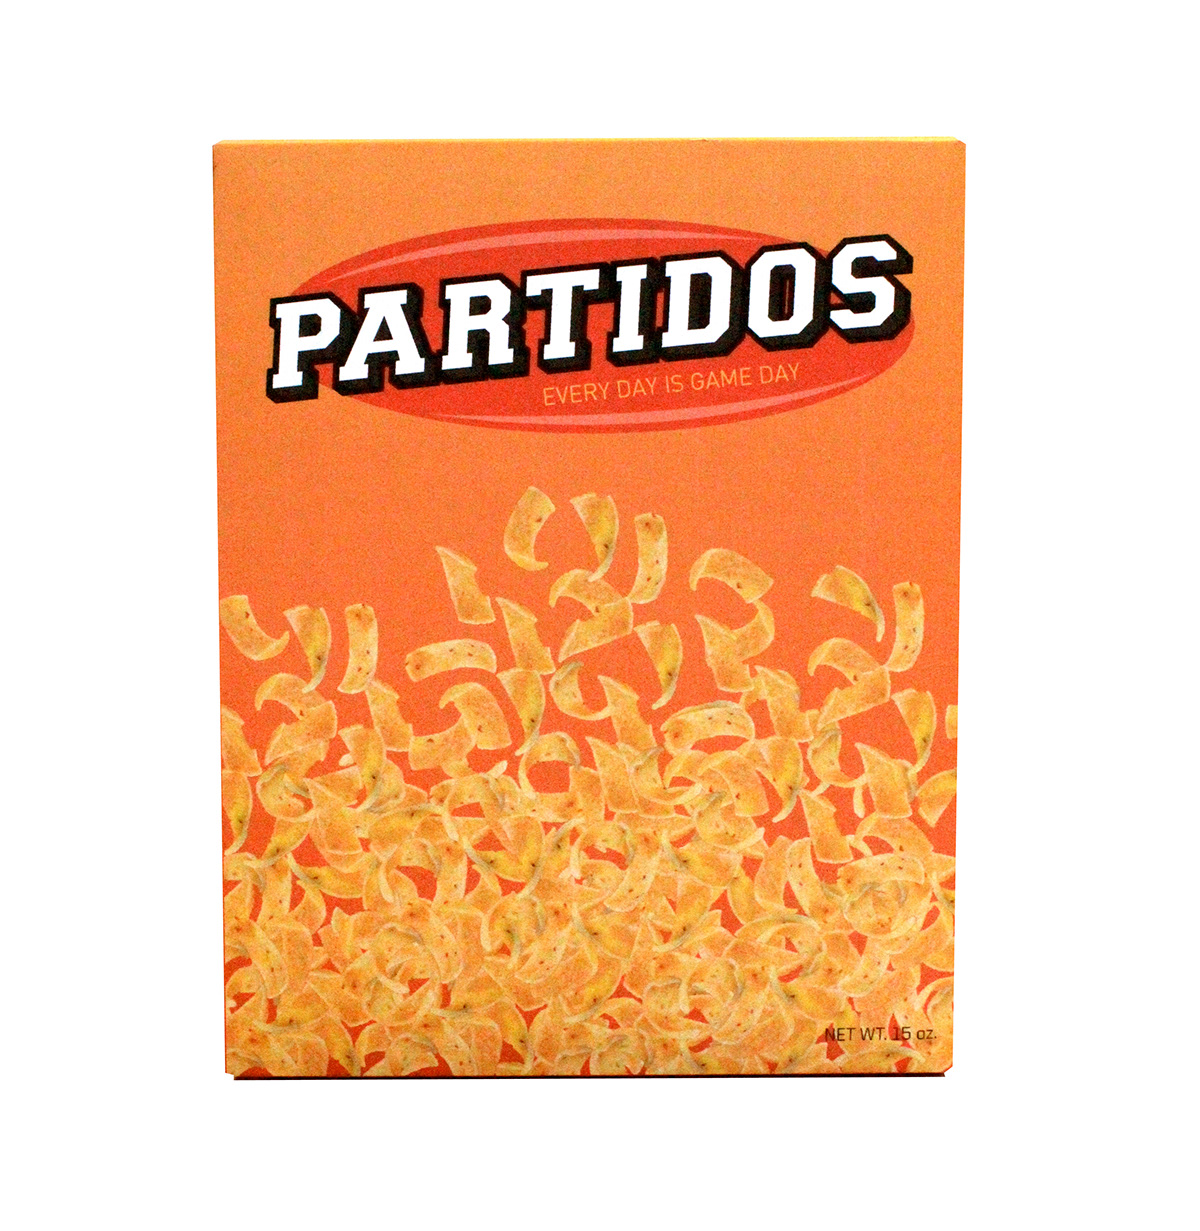 Partidos chips box package